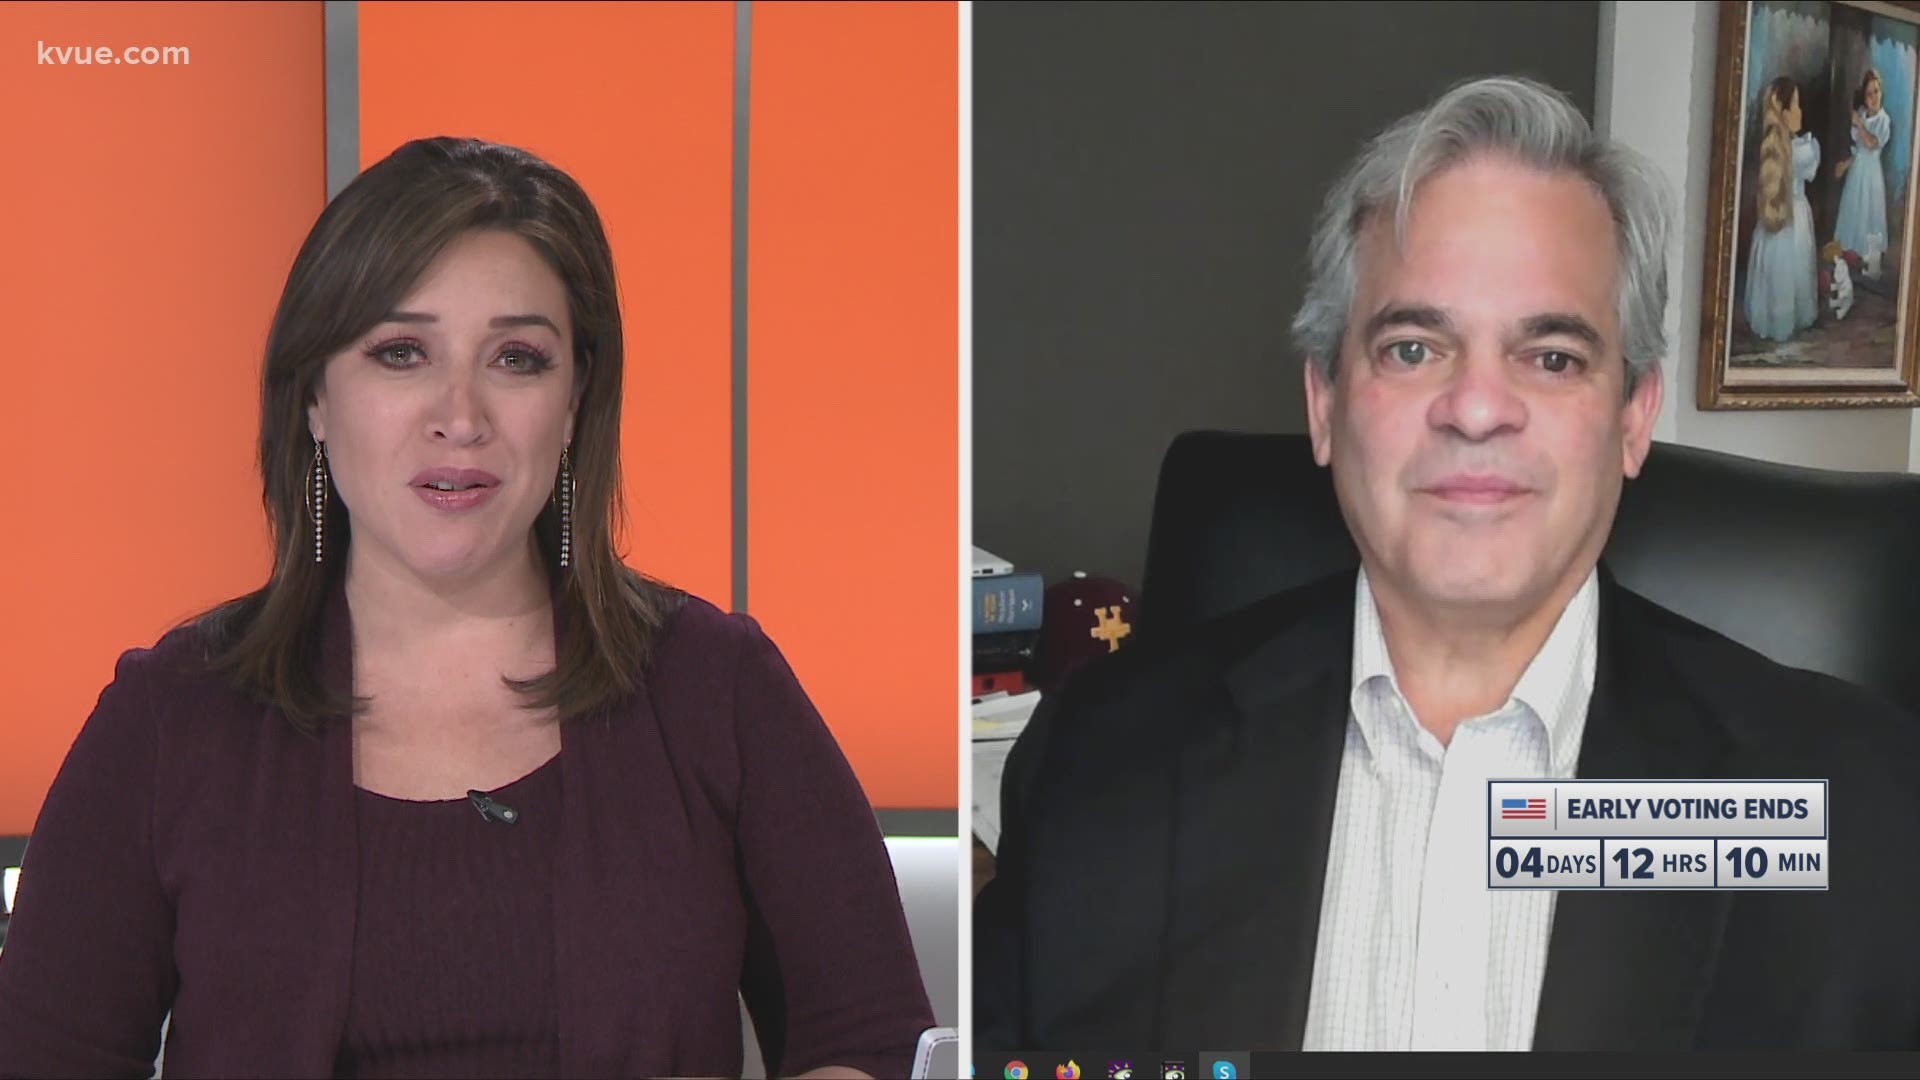 Austin Mayor Steve Adler joined KVUE Daybreak to discuss the state of coronavirus and early voting.